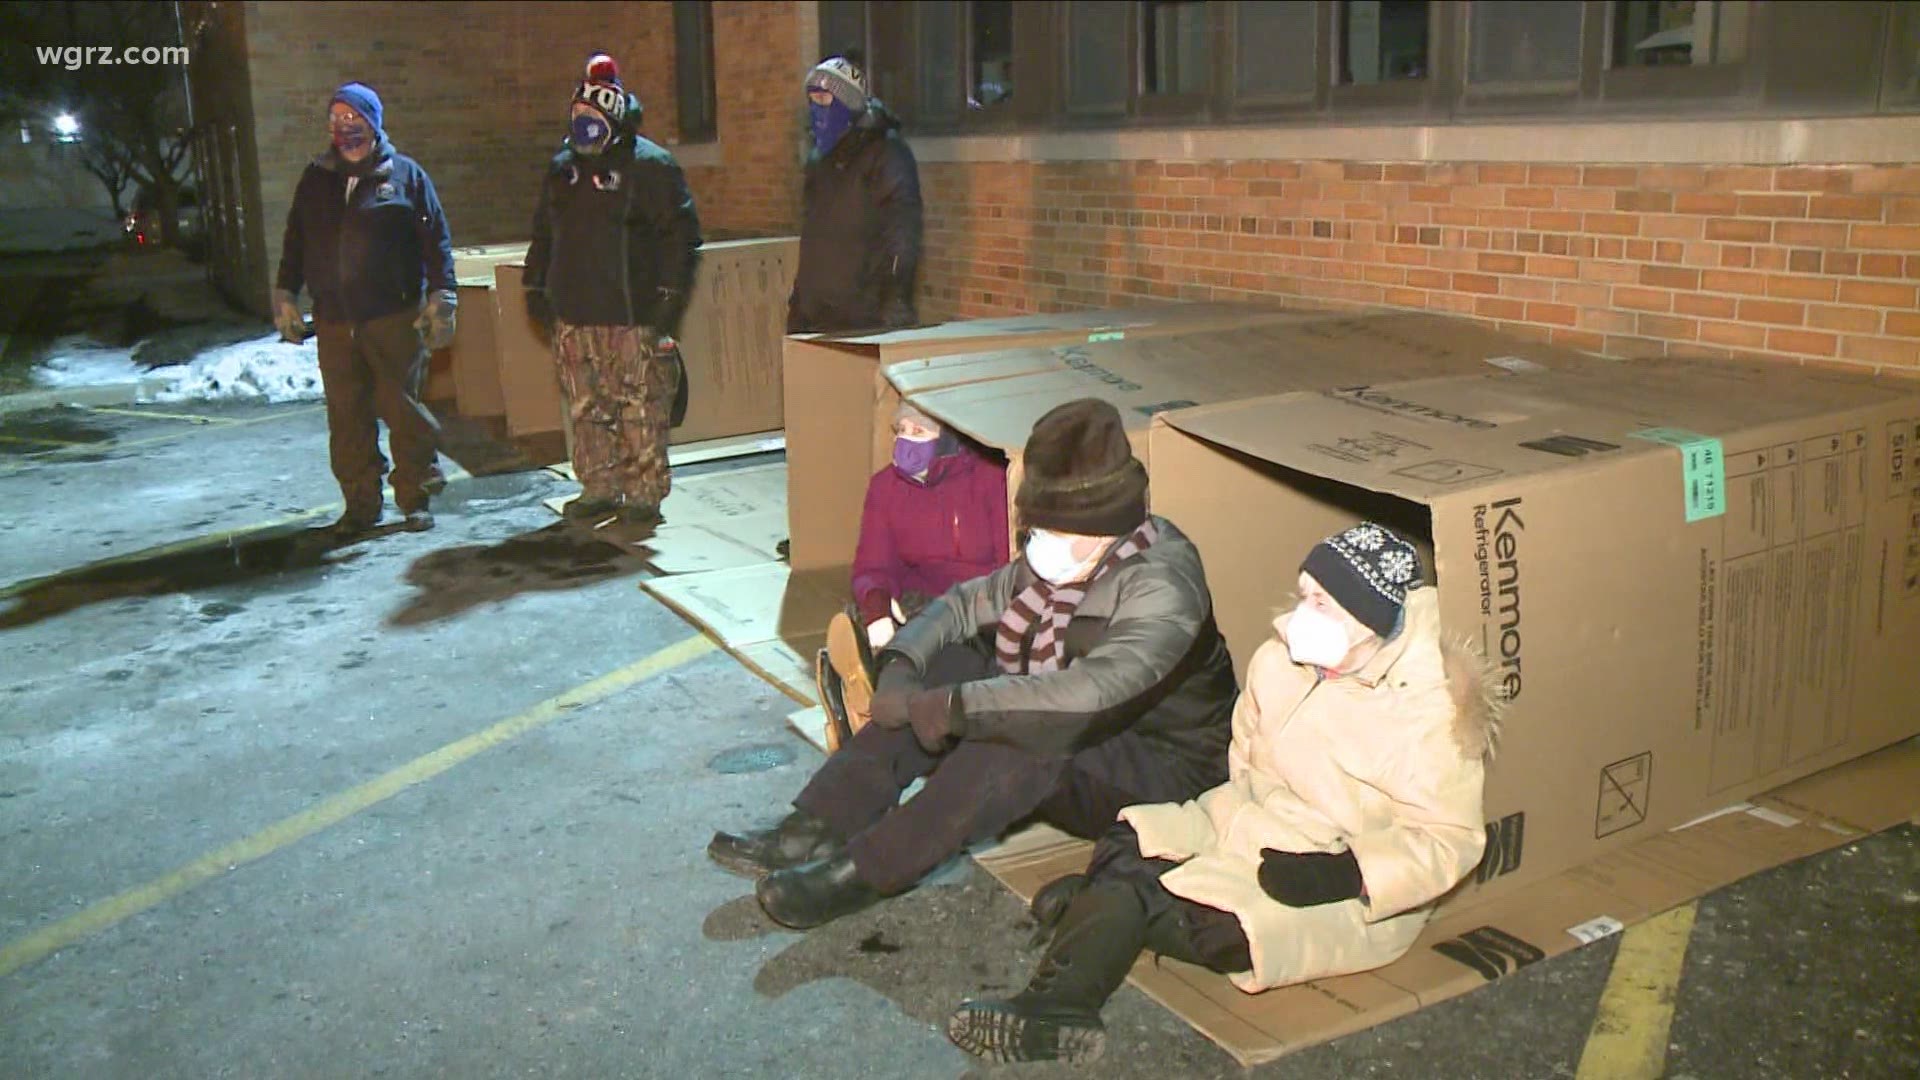 A limited number of students, teachers, even the Superintendent, are sleeping outside the administration building tonight, to raise money for local families.